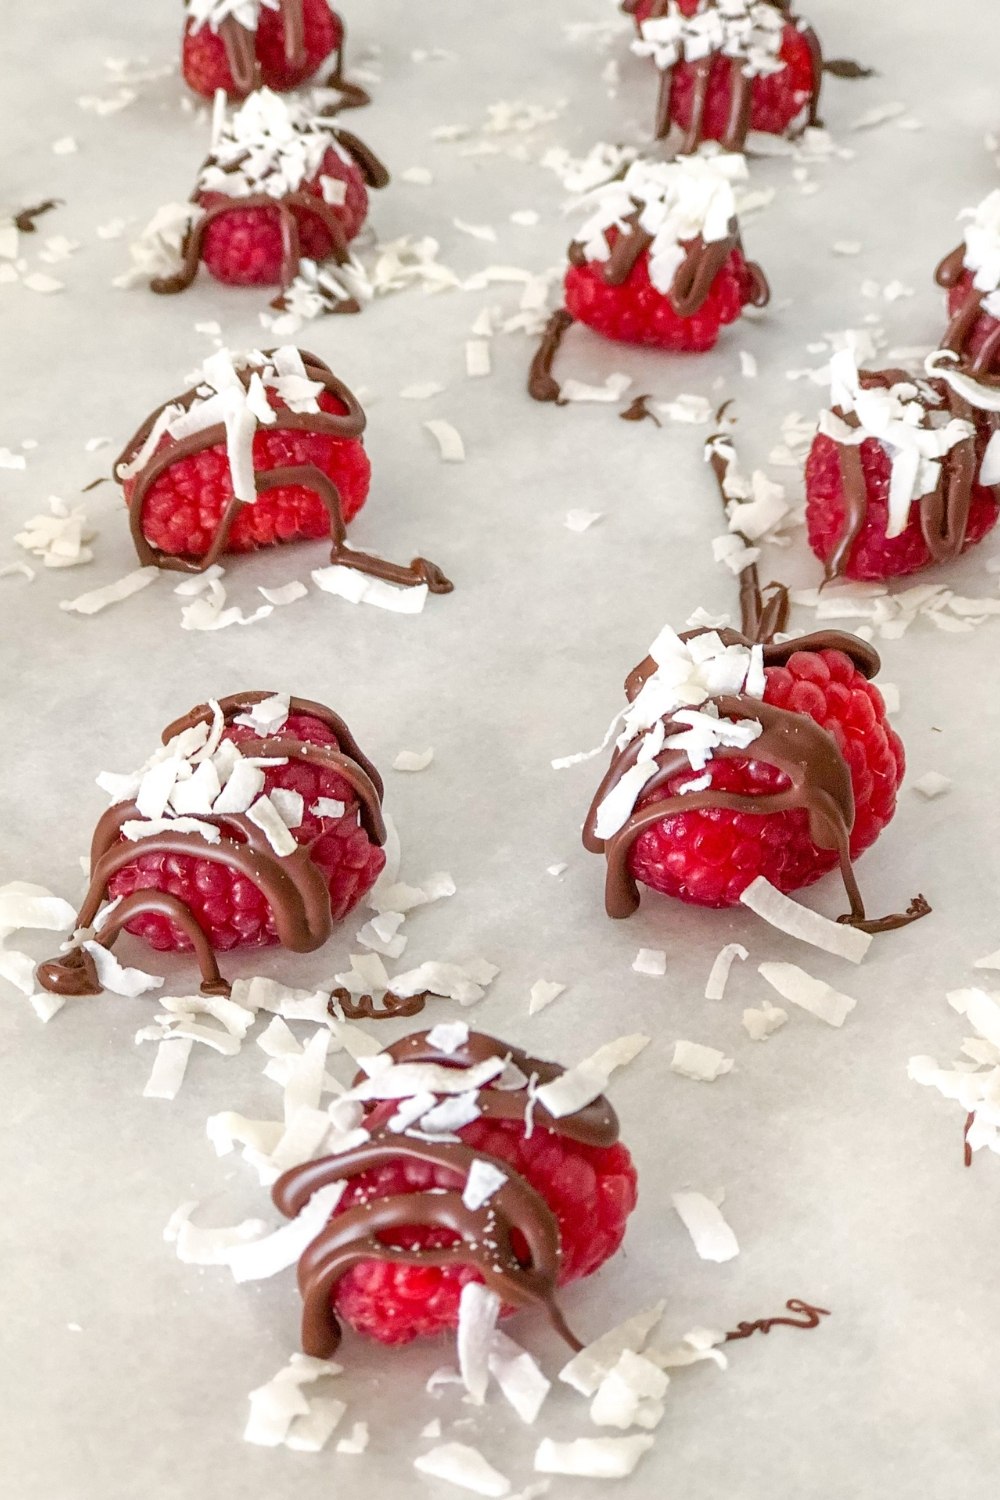 raspberries with chocolate drizzle and coconut on parchment paper